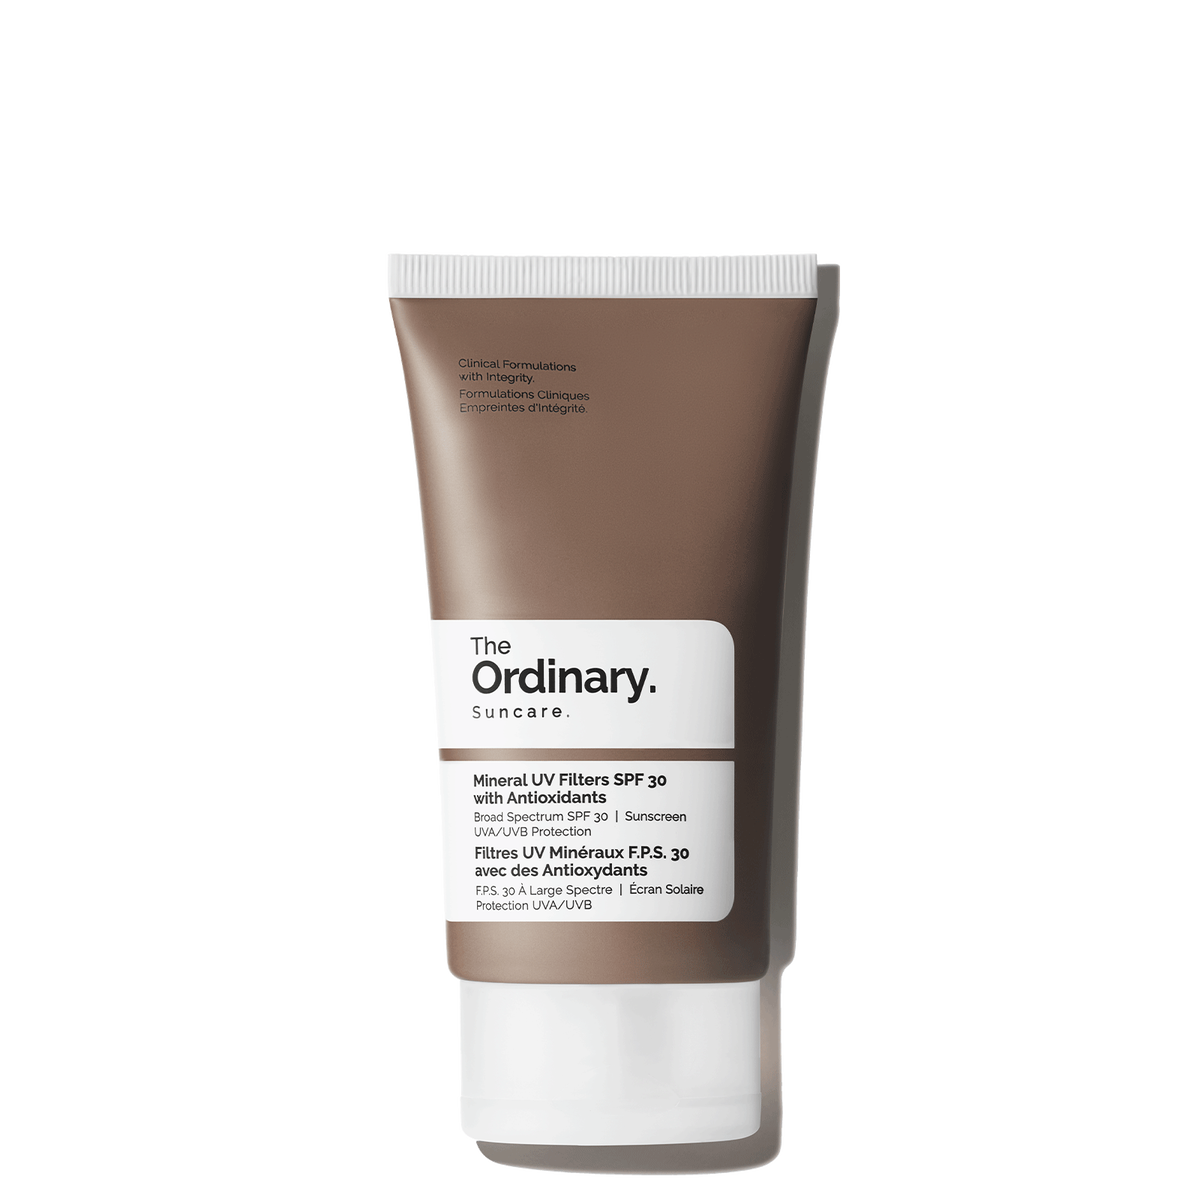 THE ORDINARY Mineral UV Filters SPF 30 with Antioxidants - Parafam